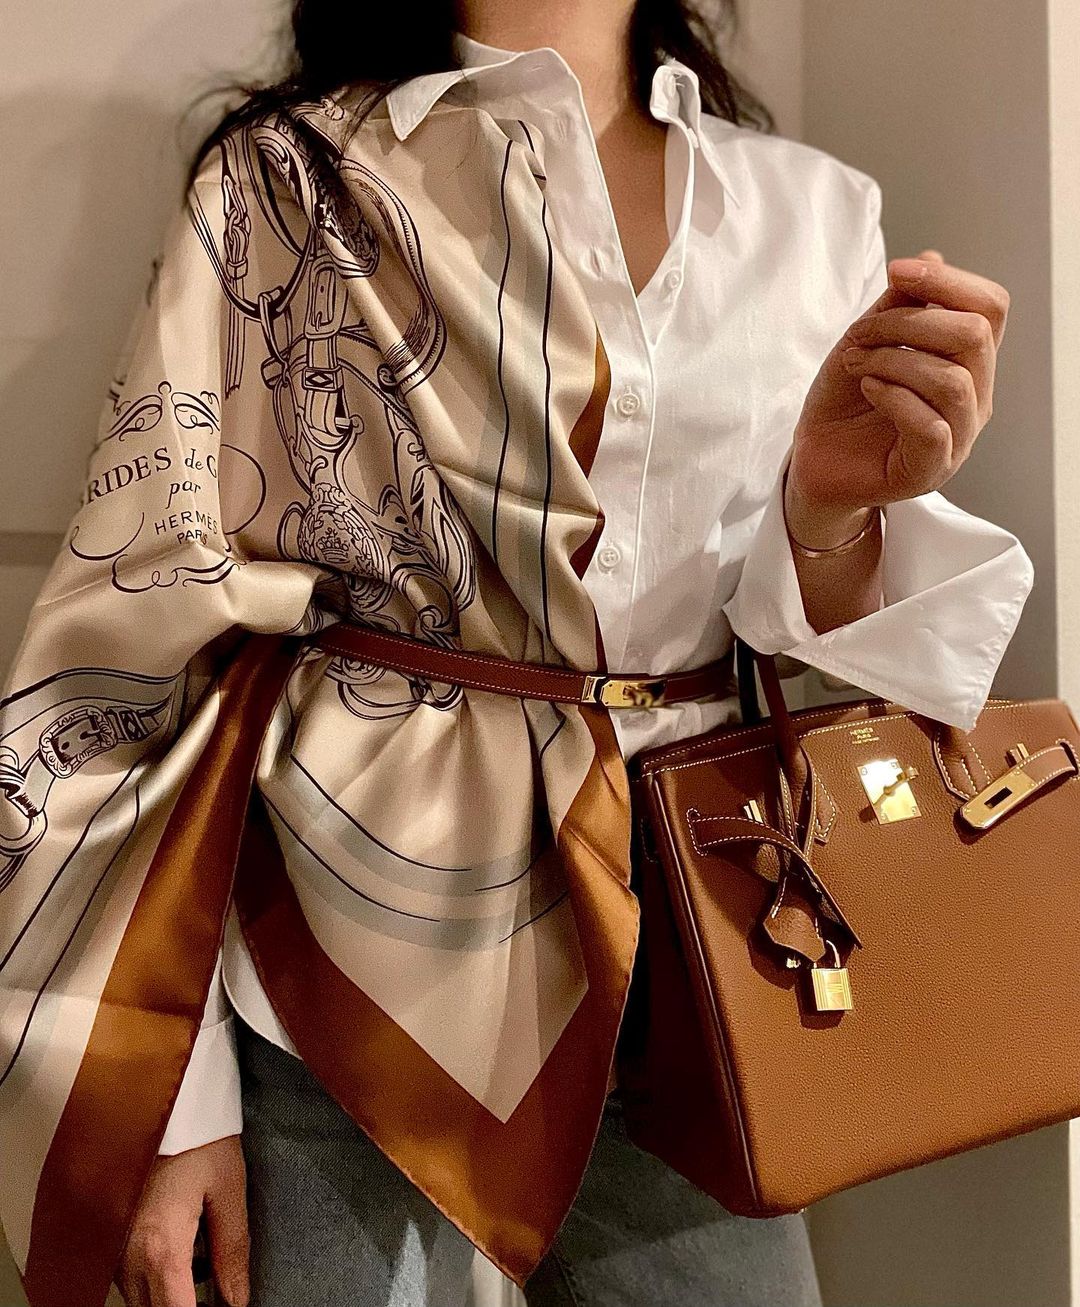 42 Hermes Scarf Outfits: What To Wear With a Hermes Scarf?